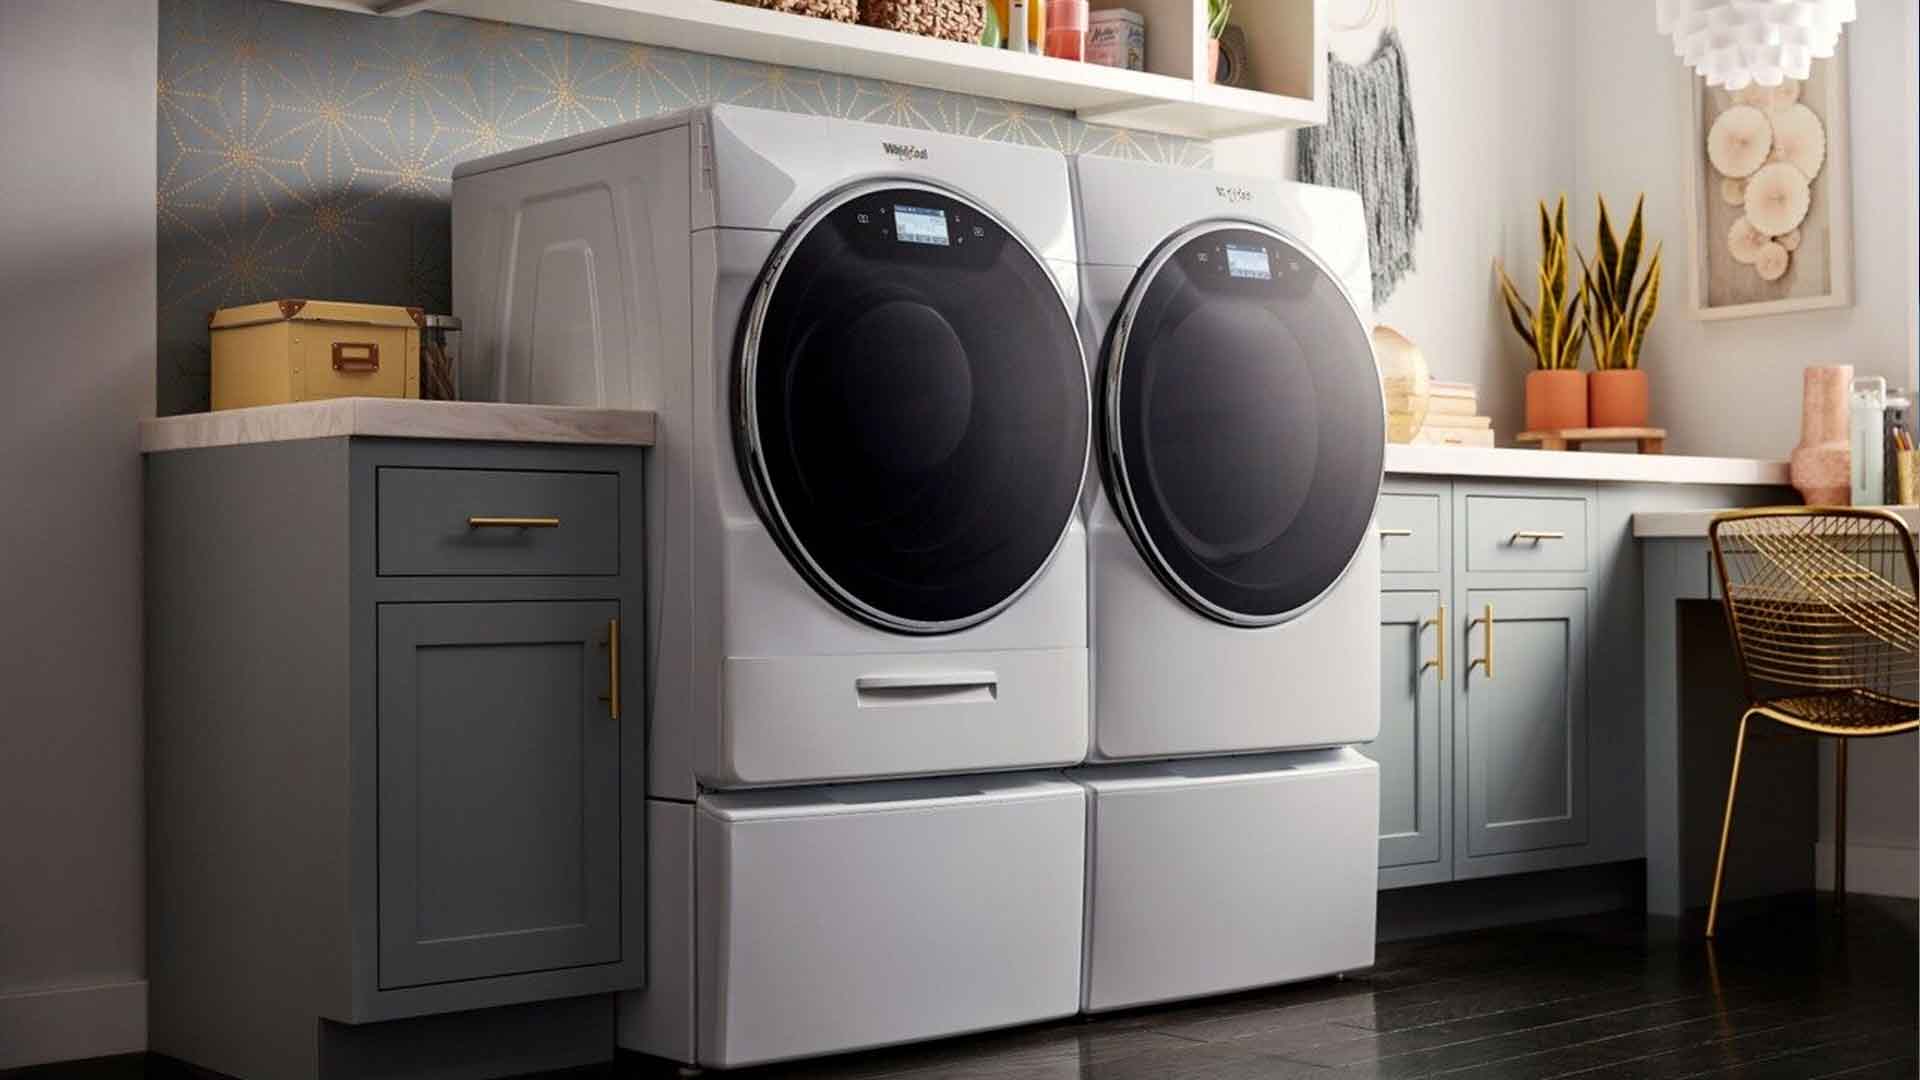 How Do I Know if My Whirlpool Washer Transmission is Bad? - Whirlpool Appliance Repair